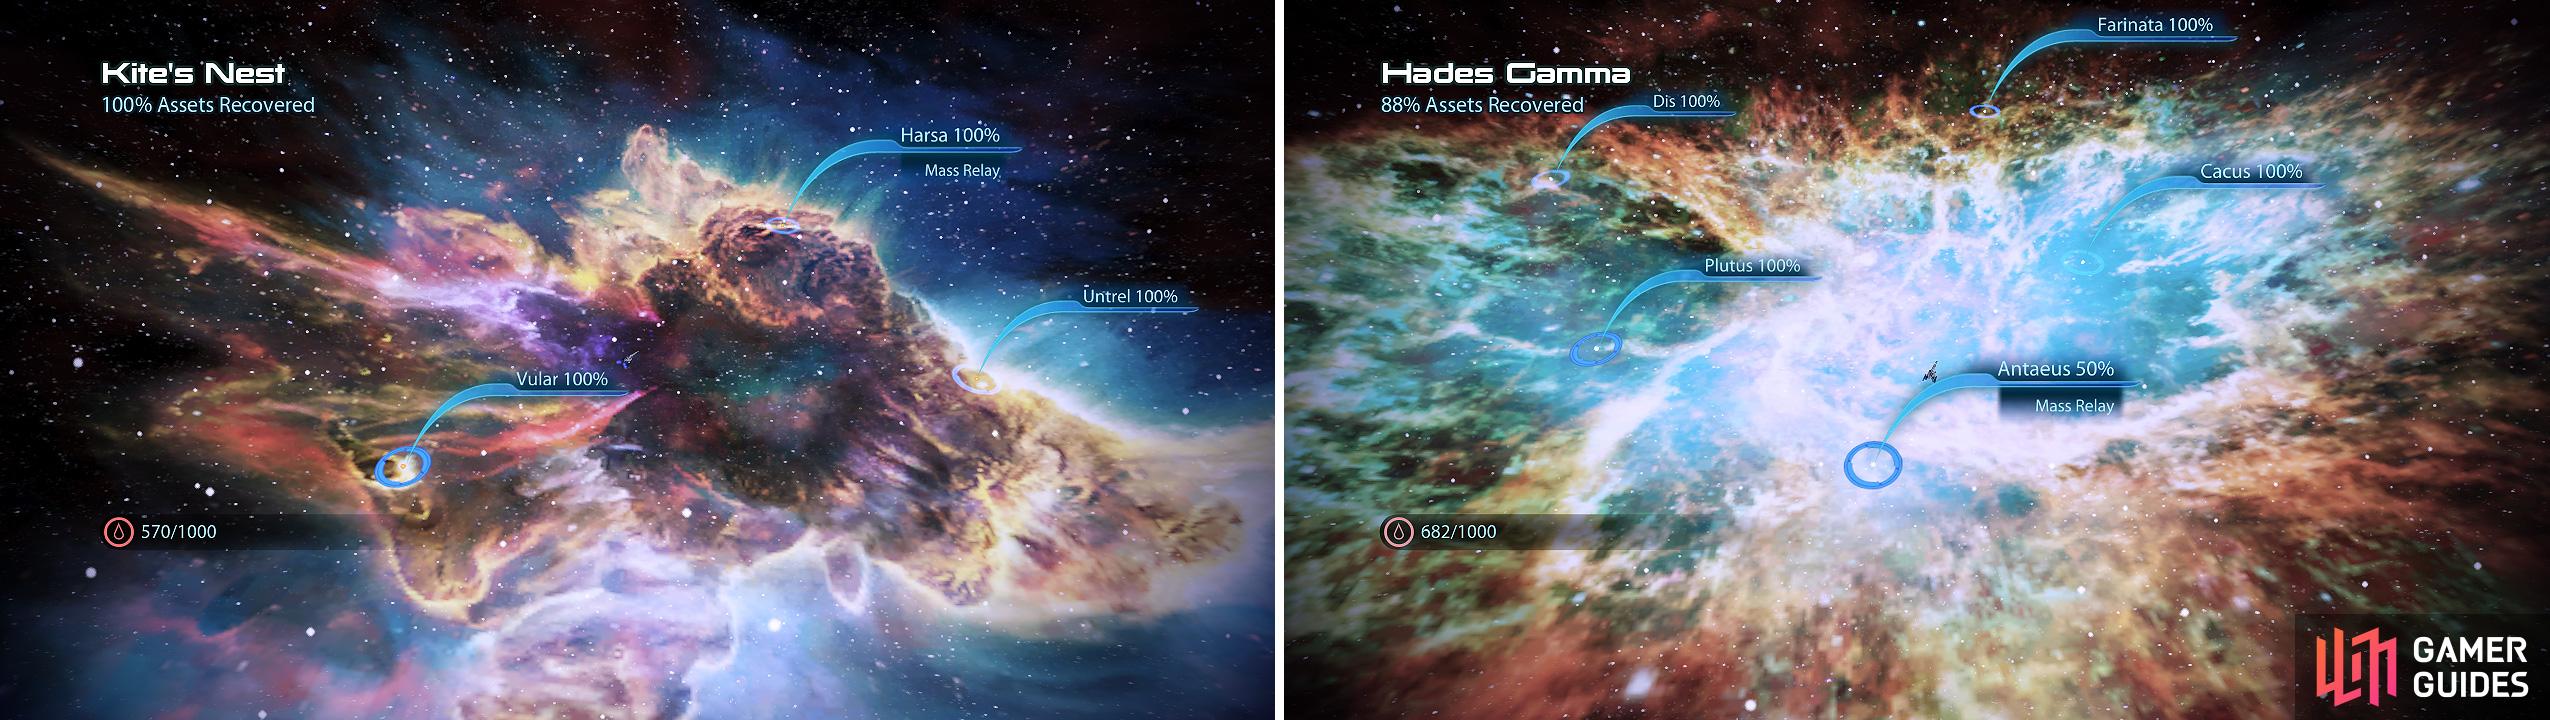 The Kite's Nest is a large area, holding a plethora of things to uncover (left). The beautiful Hades Gamma is home to some new War Assets and quite a few Credits (right).